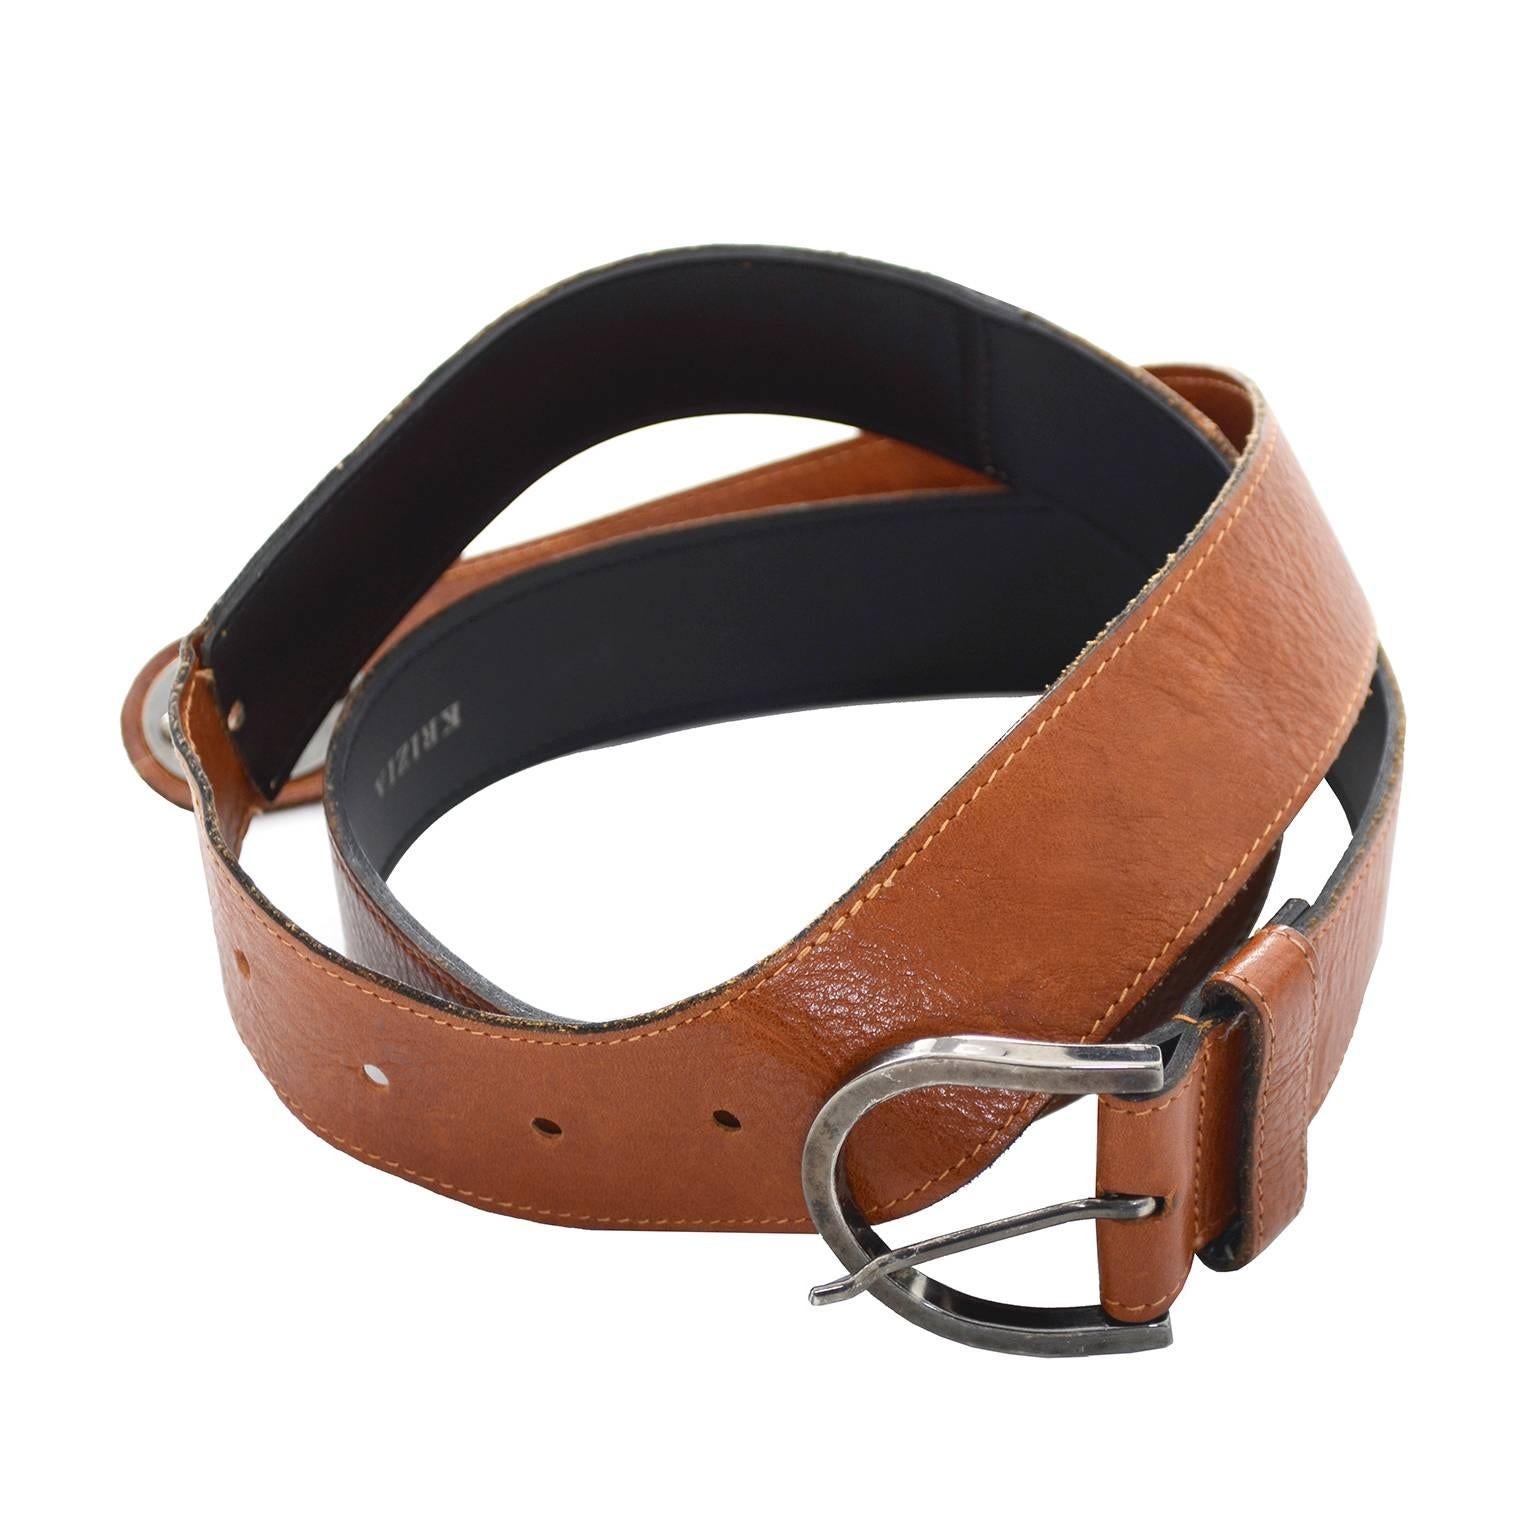 We ove this Krizia vintage leather belt! This fabulous belt is shaped somewhat like an L and can be looped over as shown in the photographs.  The belt is 1 and 1/2 inches wide and fits from 31-35